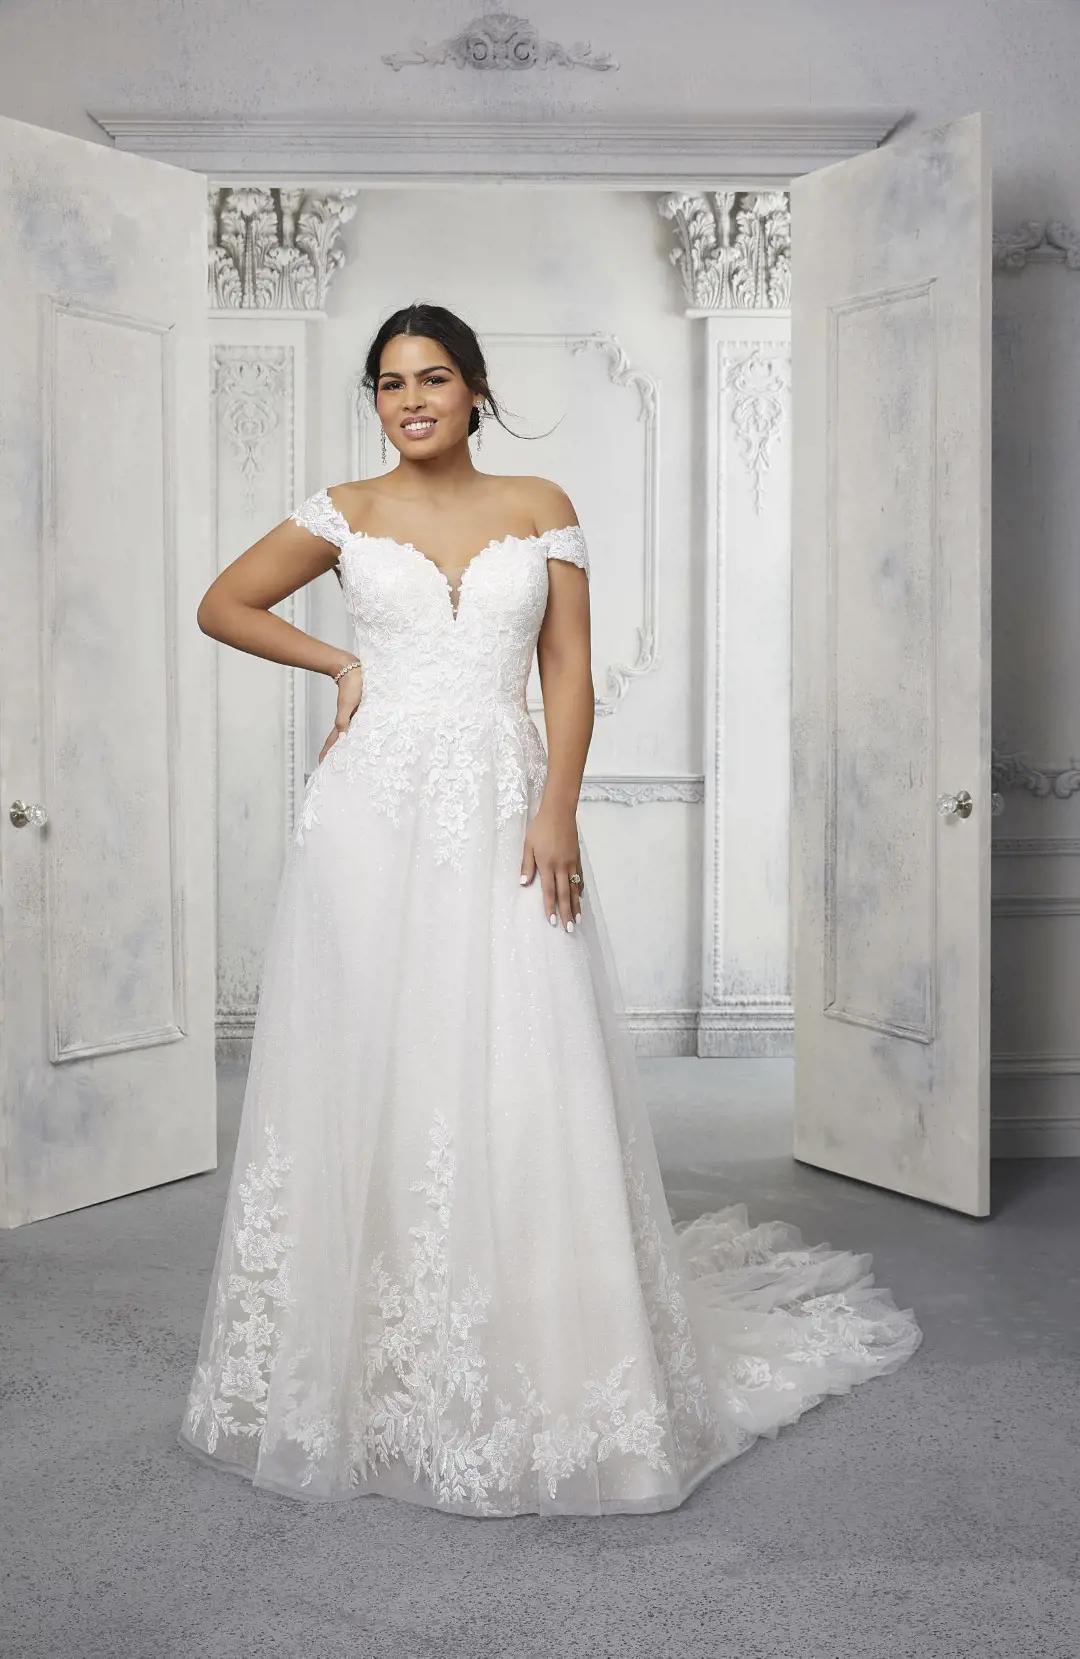 The Curvy Girl’s Guide to Plus-Size Wedding Dress Shopping. Desktop Image